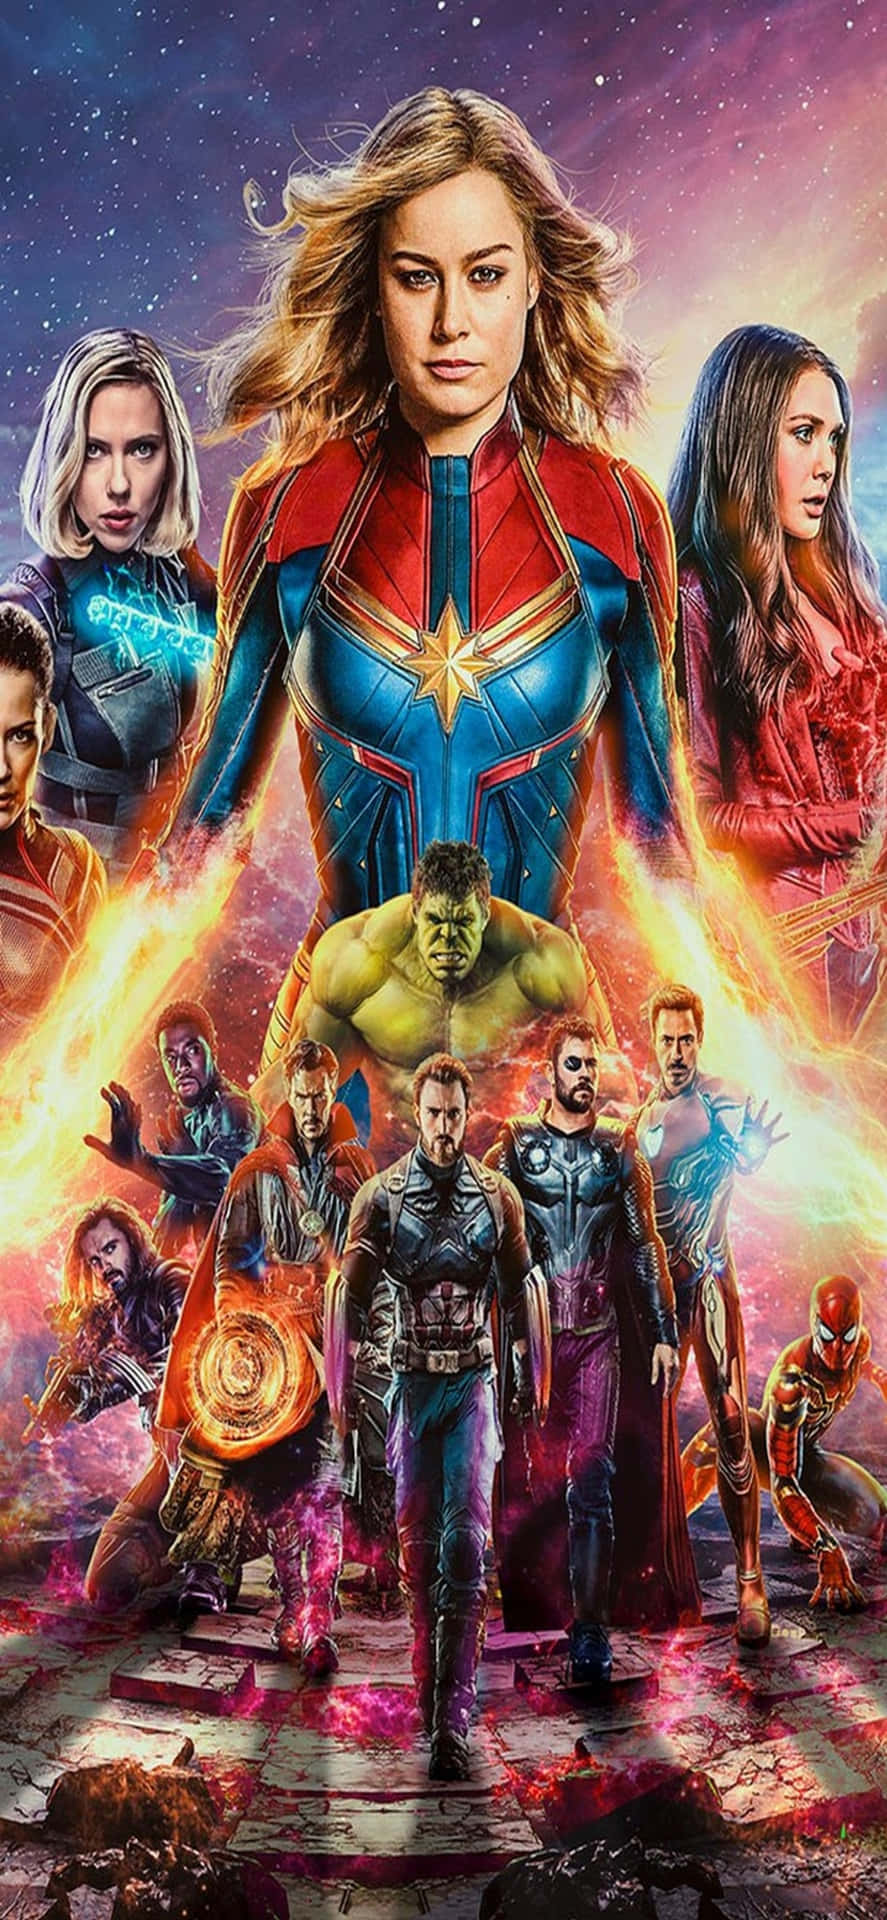 Get Ready For Battle with the Iphone Xs and Marvel's Avengers!